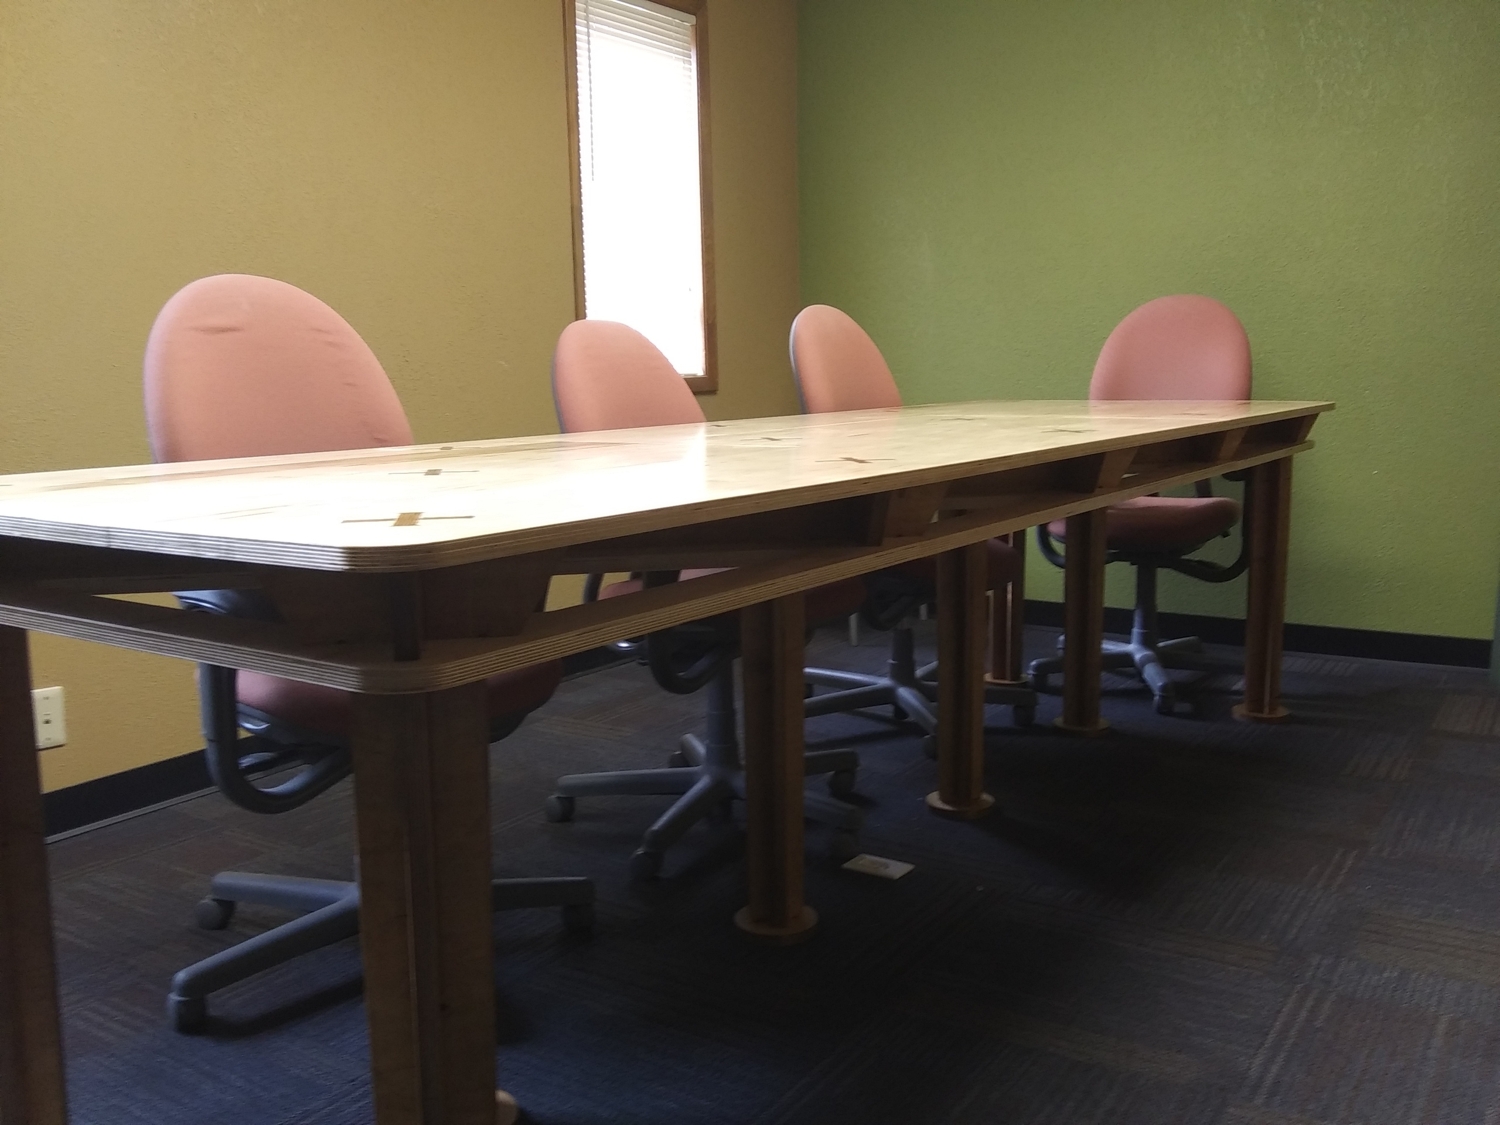 Laser Cut Conference Room Table 10x4ft DXF File